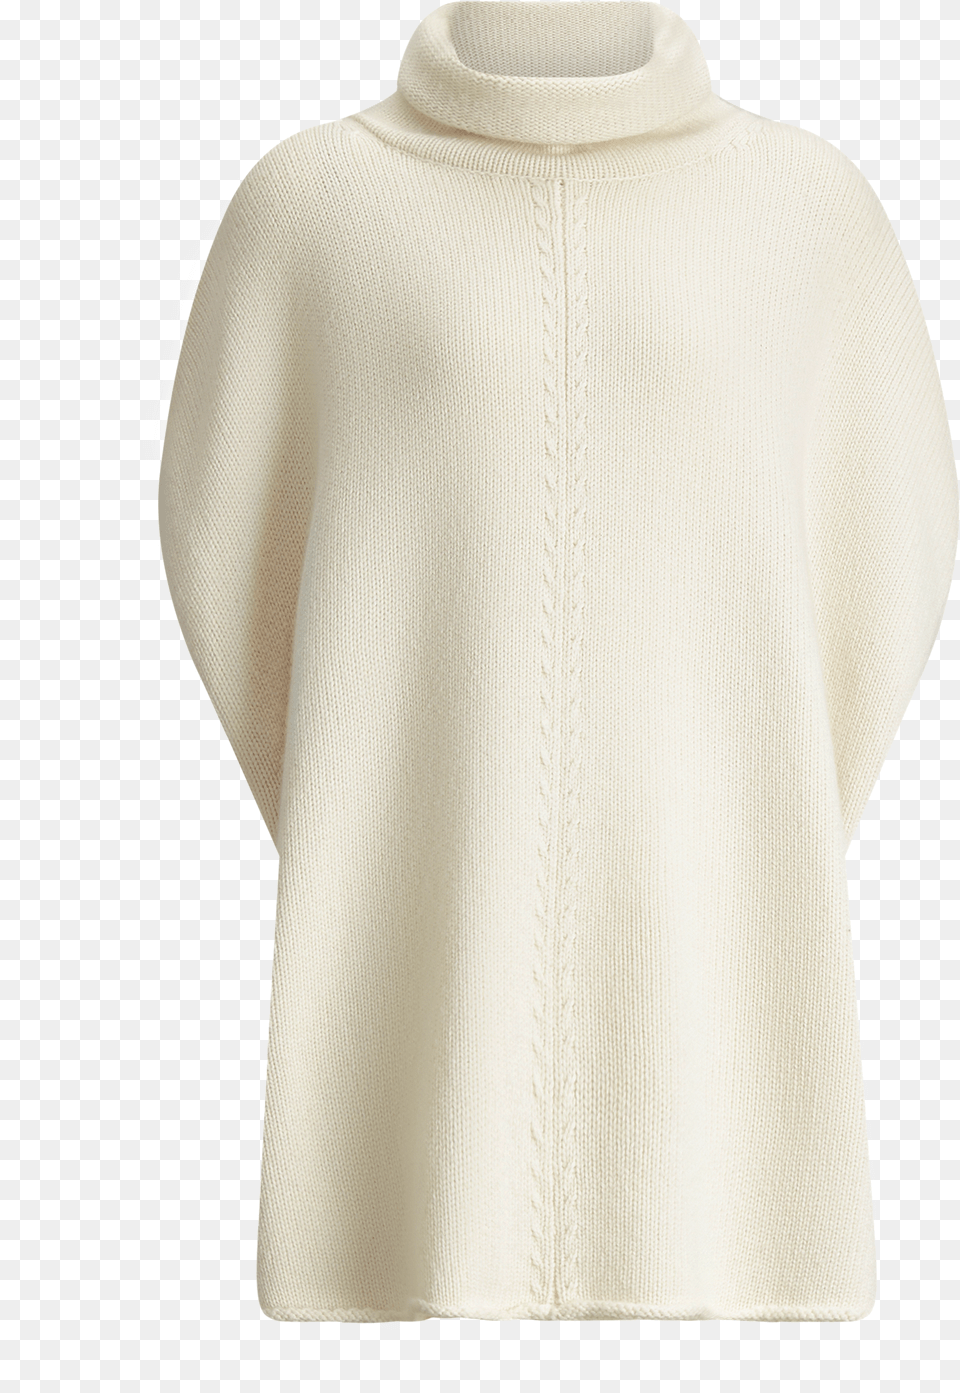 Poncho Wool Cashmere Knit Sweater, Clothing, Knitwear, Fashion, Coat Png